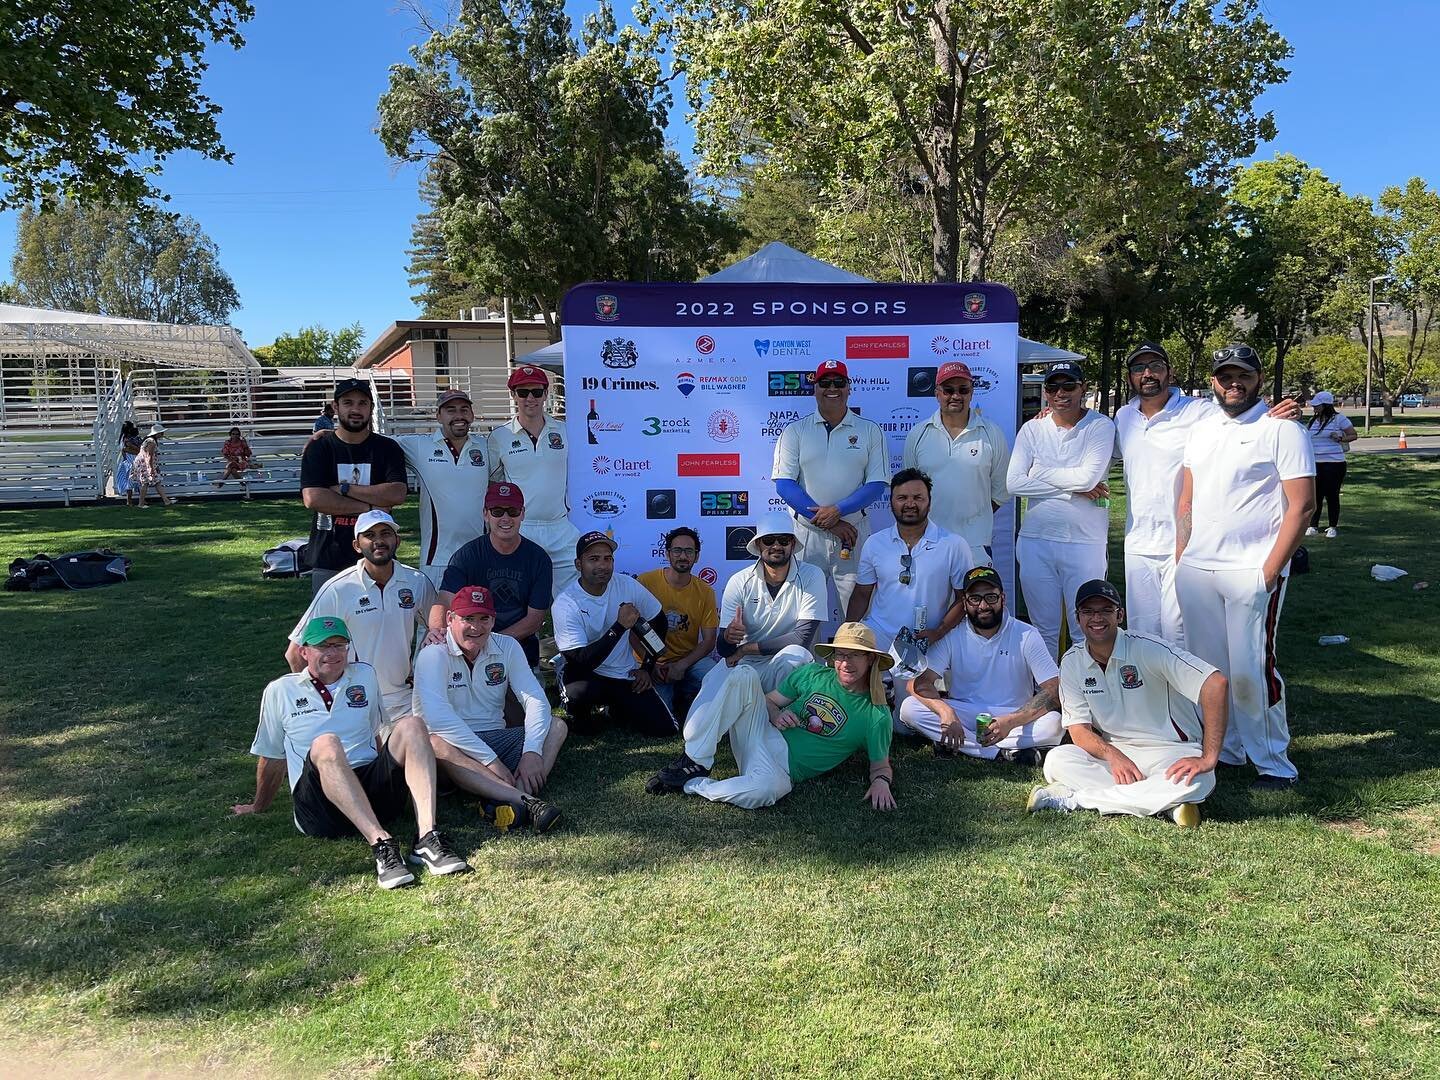 Our first home match of 2022 saw us face our old rivals, the Sonoma Gullies, on the Midway Green at the @NapaValleyExpo in downtown Napa. Despite taking regular wickets the Gullies managed to set a ground record of 316 runs which we can put down to l